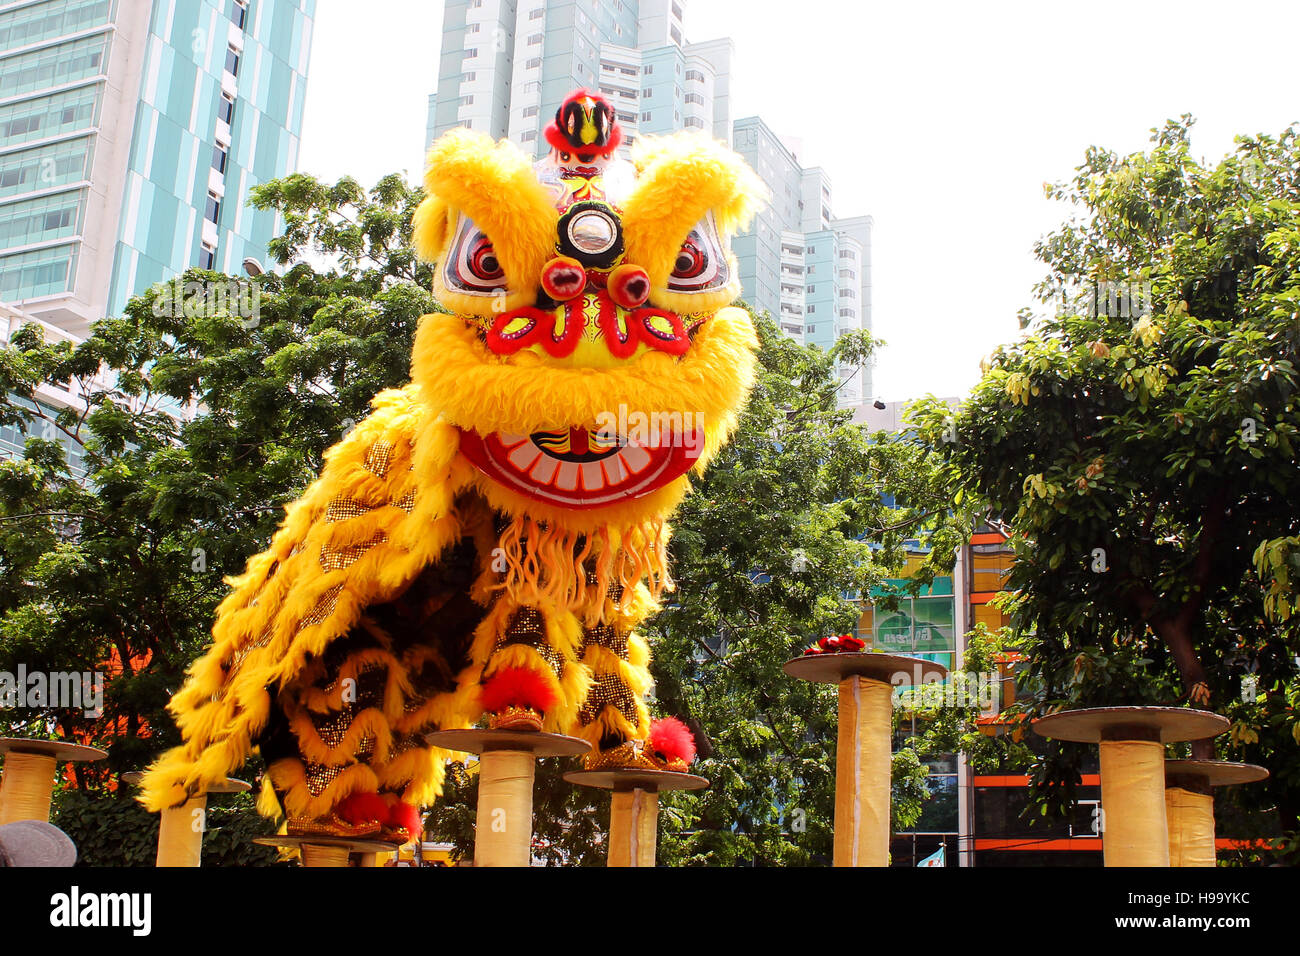 Barongsai or dragon dance in Cap Go Meh carnival which held at Glodok, Jakarta. Played by two people inside the dragon costume. Stock Photo